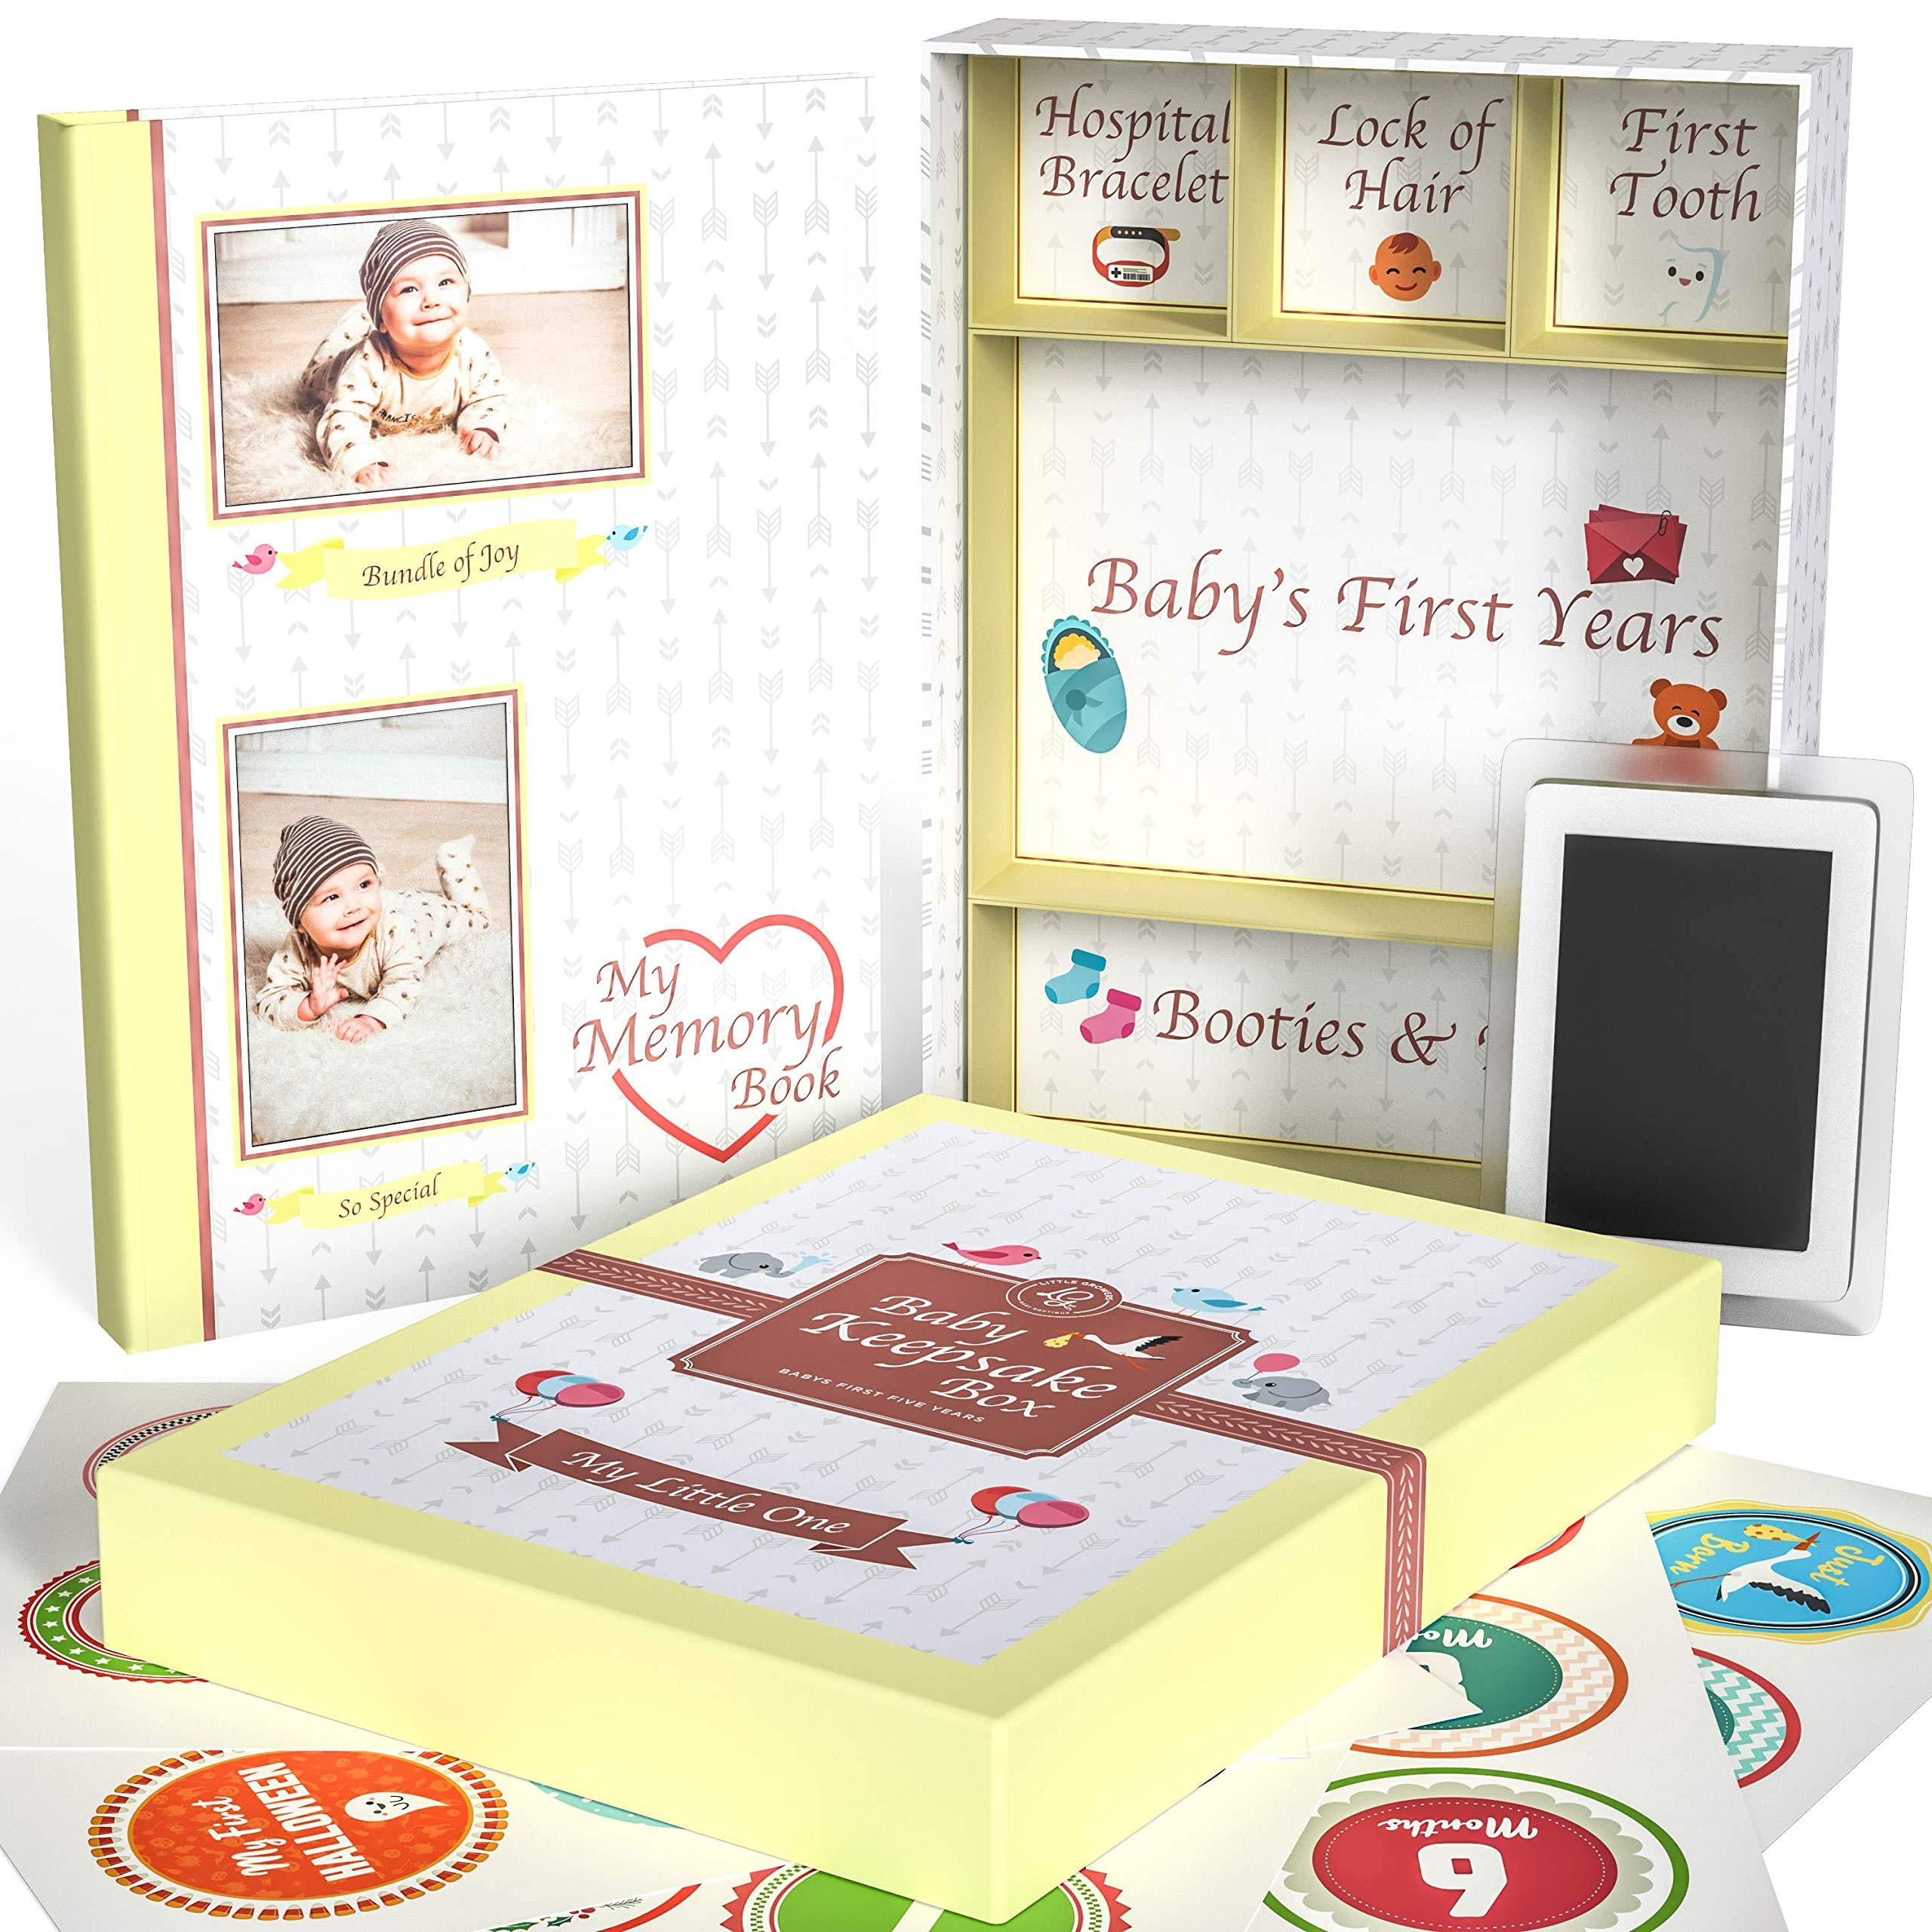 Mini Cards Kids Keepsake by Milestone Memory Collection for Children